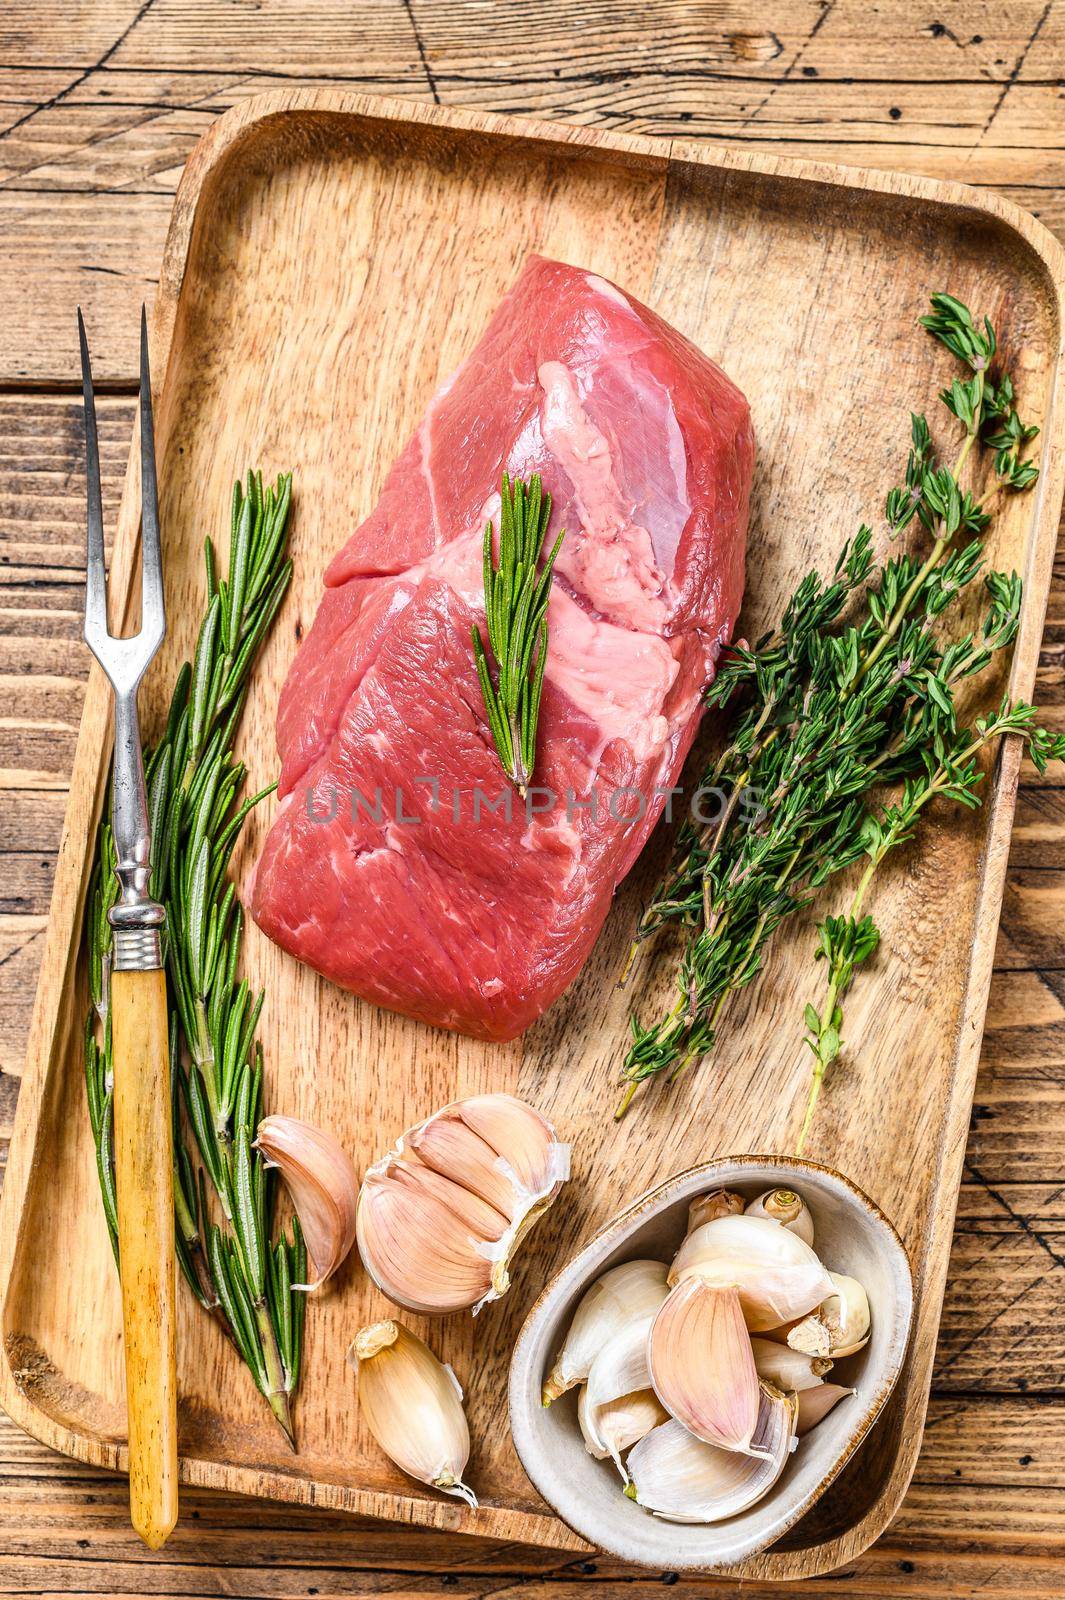 Raw lamb meat steak in a wooden tray with herbs. wooden background. Top view by Composter